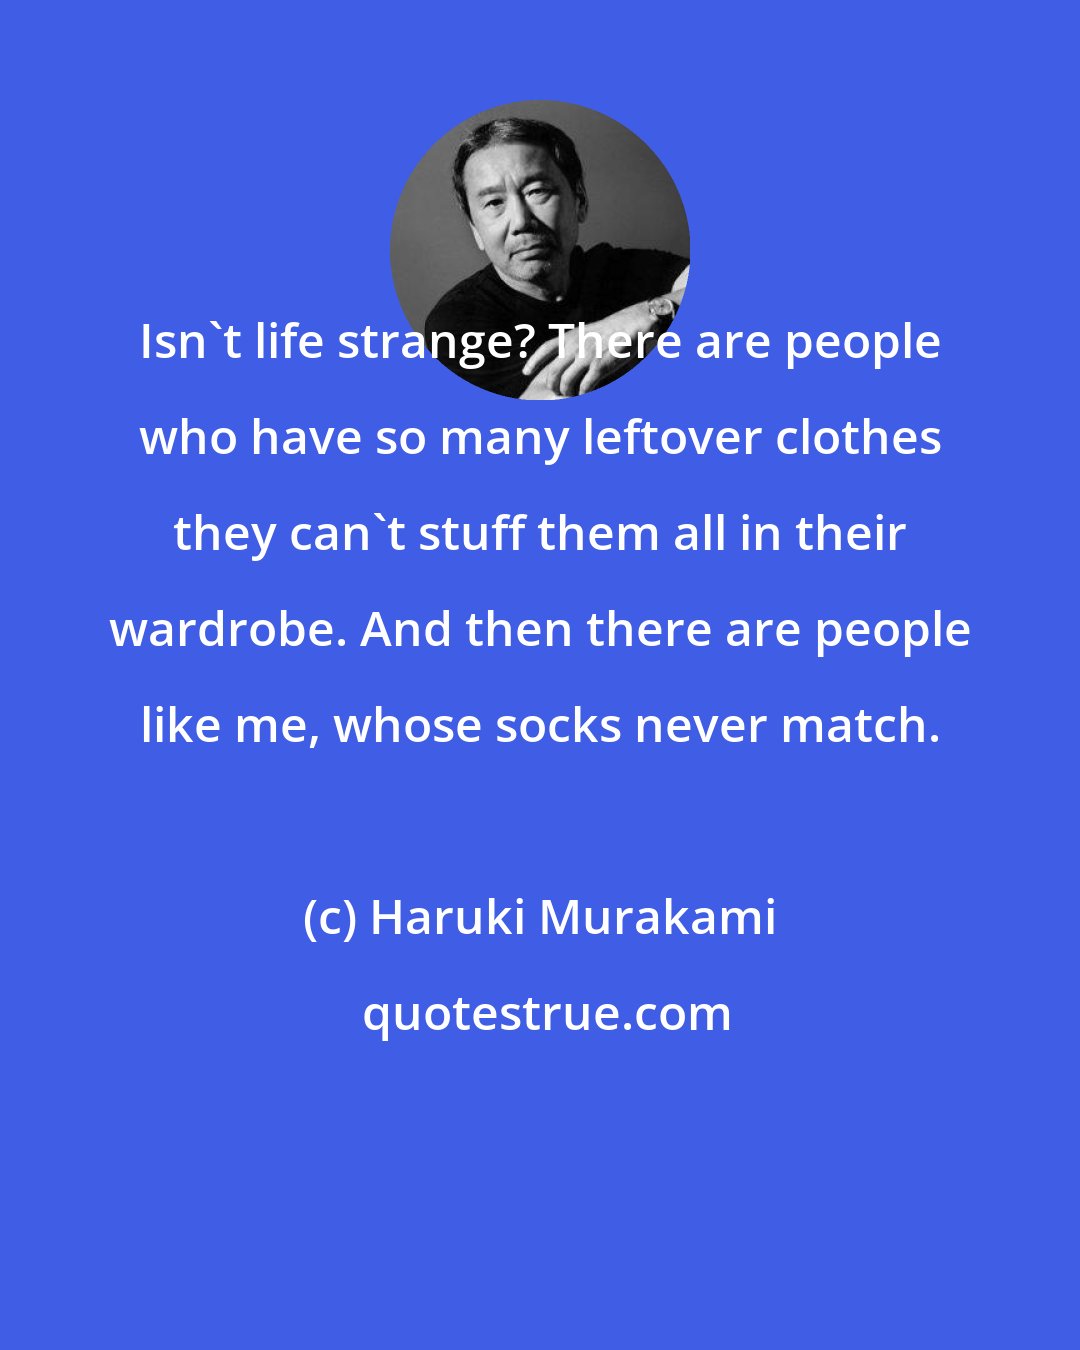 Haruki Murakami: Isn't life strange? There are people who have so many leftover clothes they can't stuff them all in their wardrobe. And then there are people like me, whose socks never match.